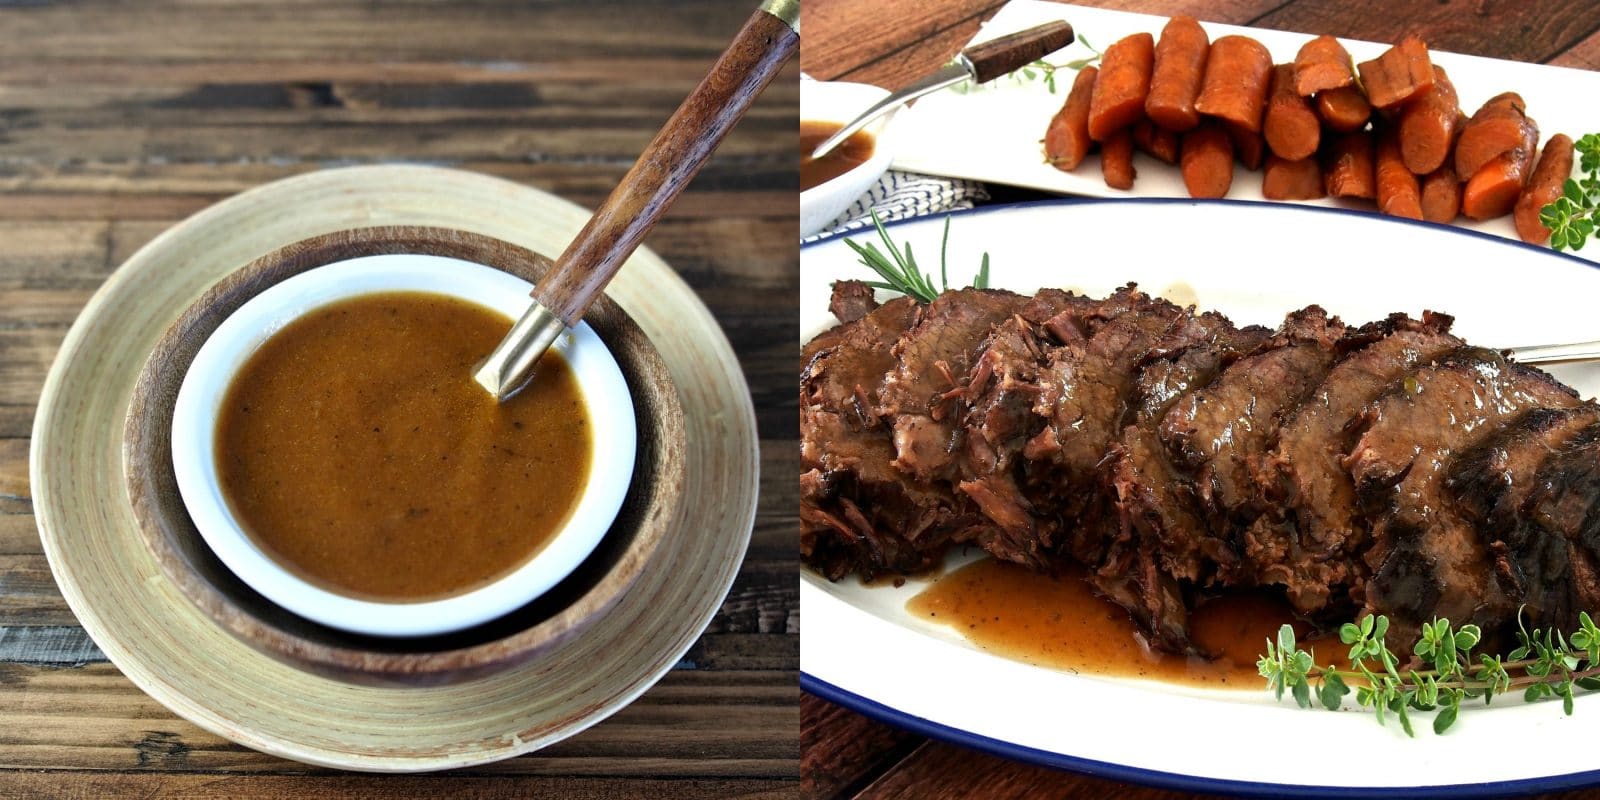 What is a recipe for beef chuck roast?